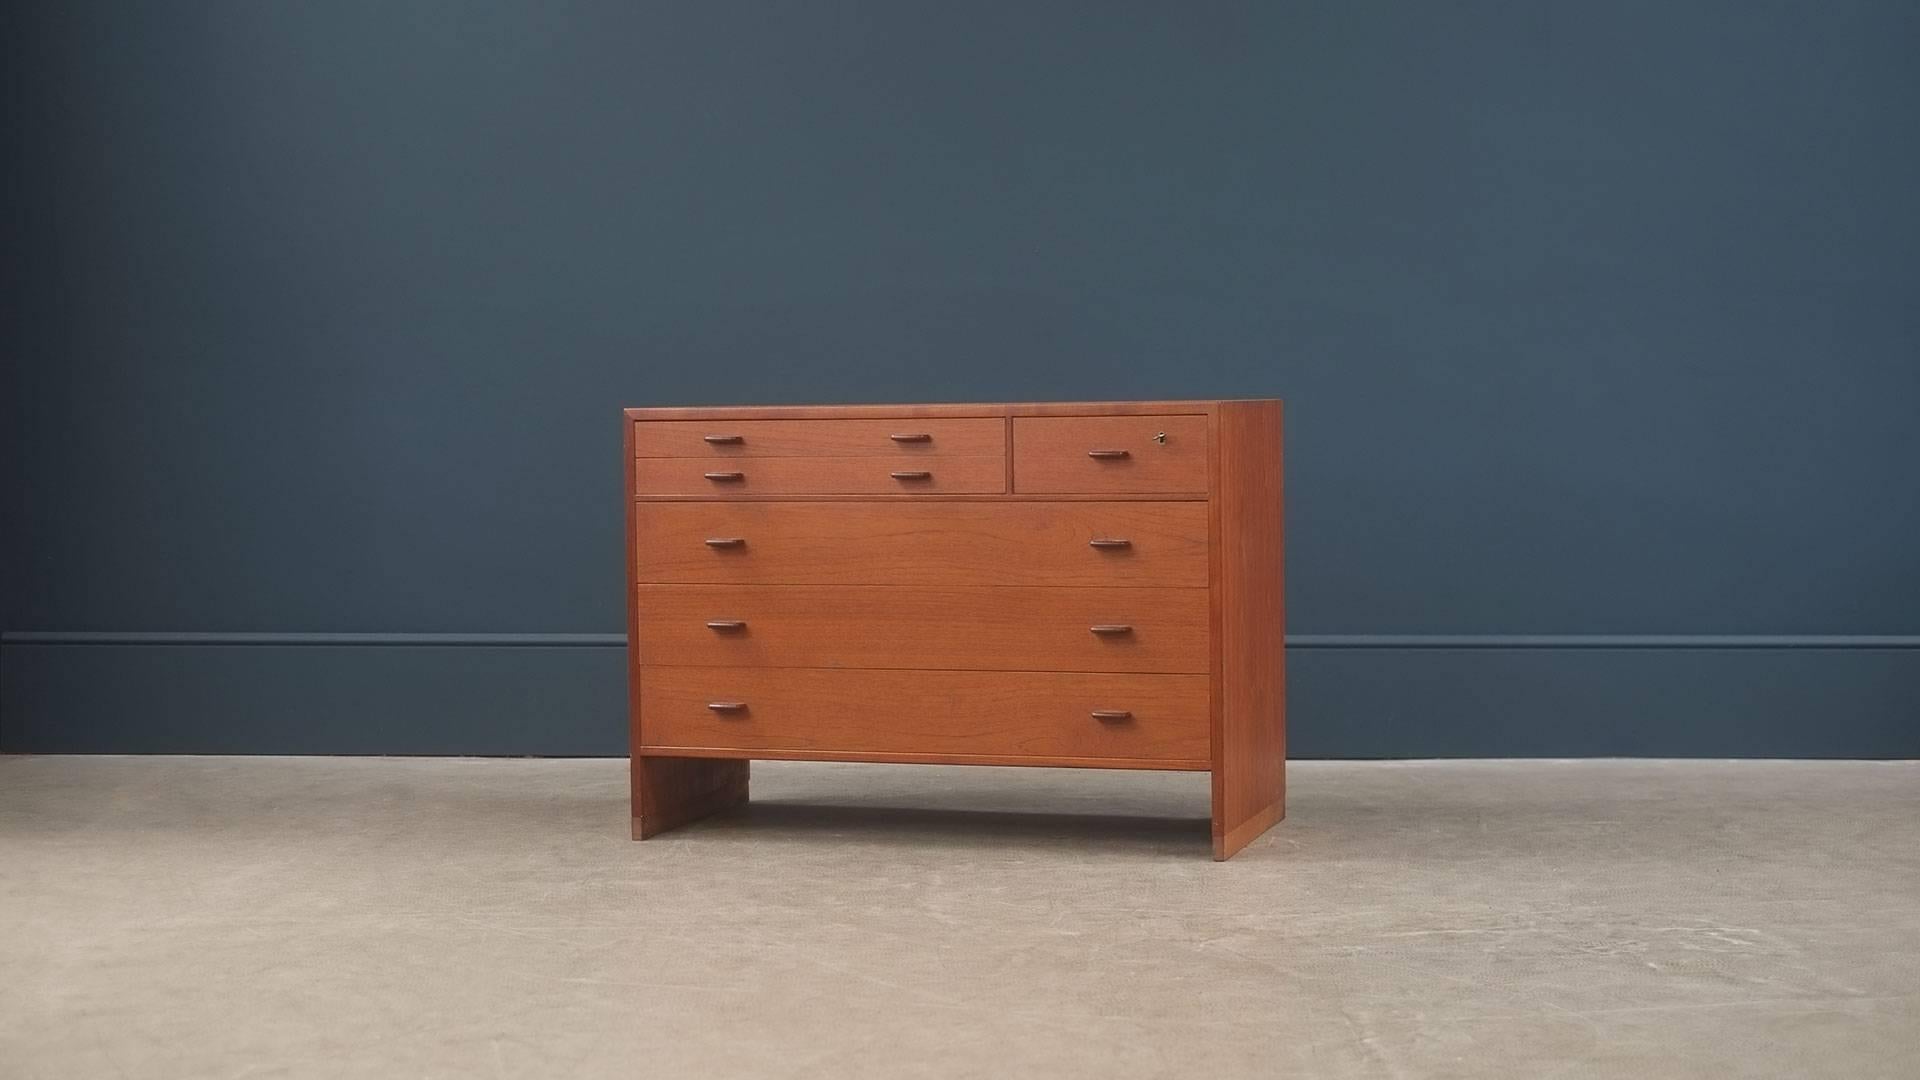 Wonderful dresser/ chest of drawers in teak designed by Hans Wegner for Ry Mobler, Denmark. Superb quality and beautiful details. Great piece.